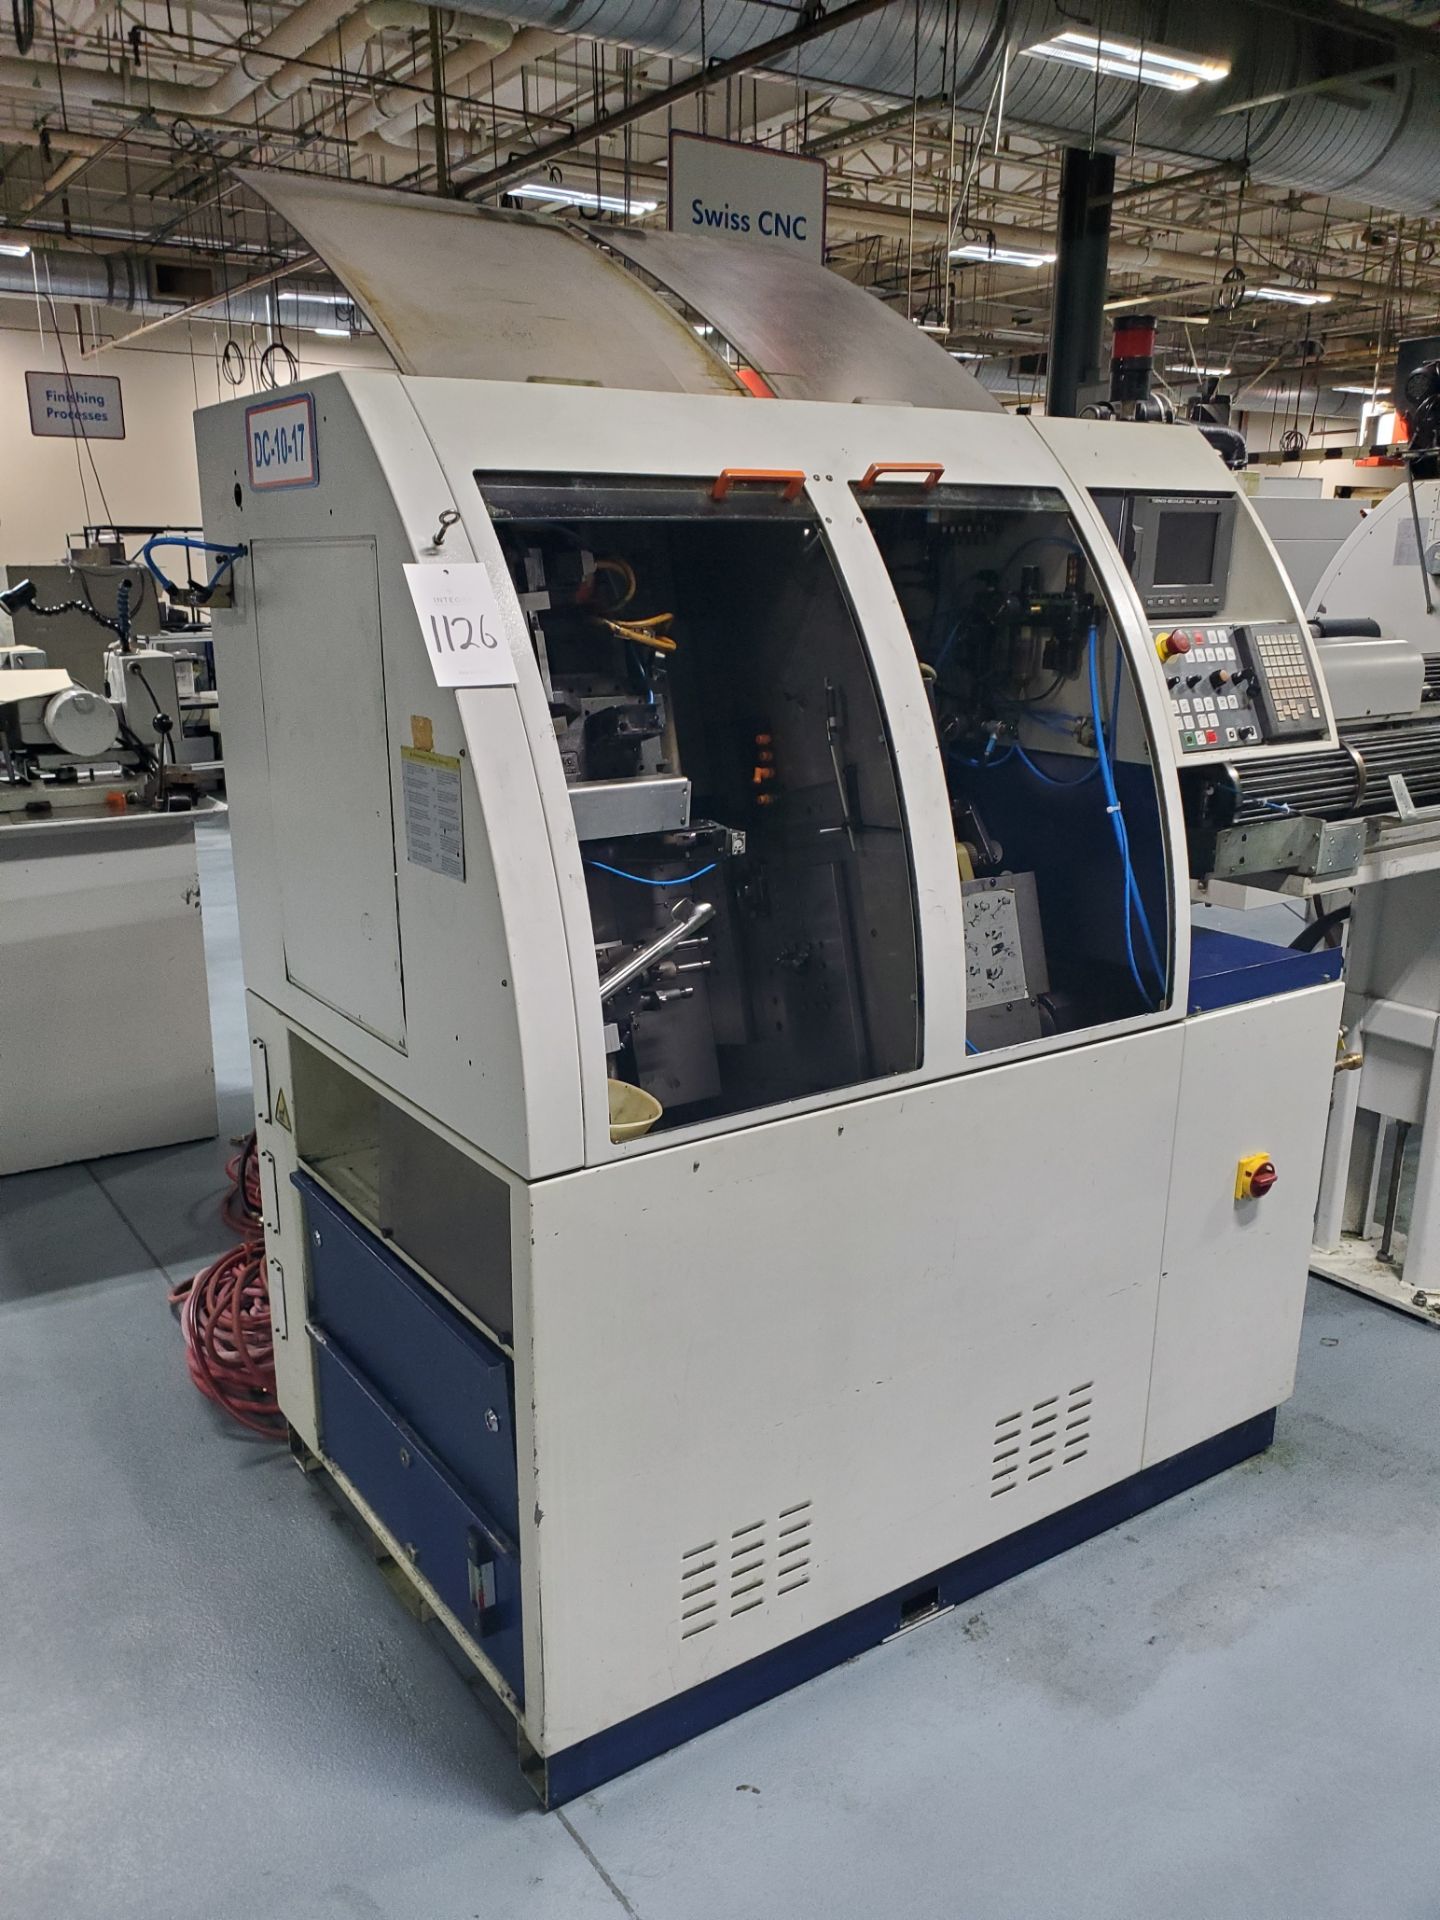 NOT OPERABLE - Tornos Bechler Deco 2000/10 10-Axis Sliding Headstock CNC Swiss-Type Screw Machine - Image 3 of 14